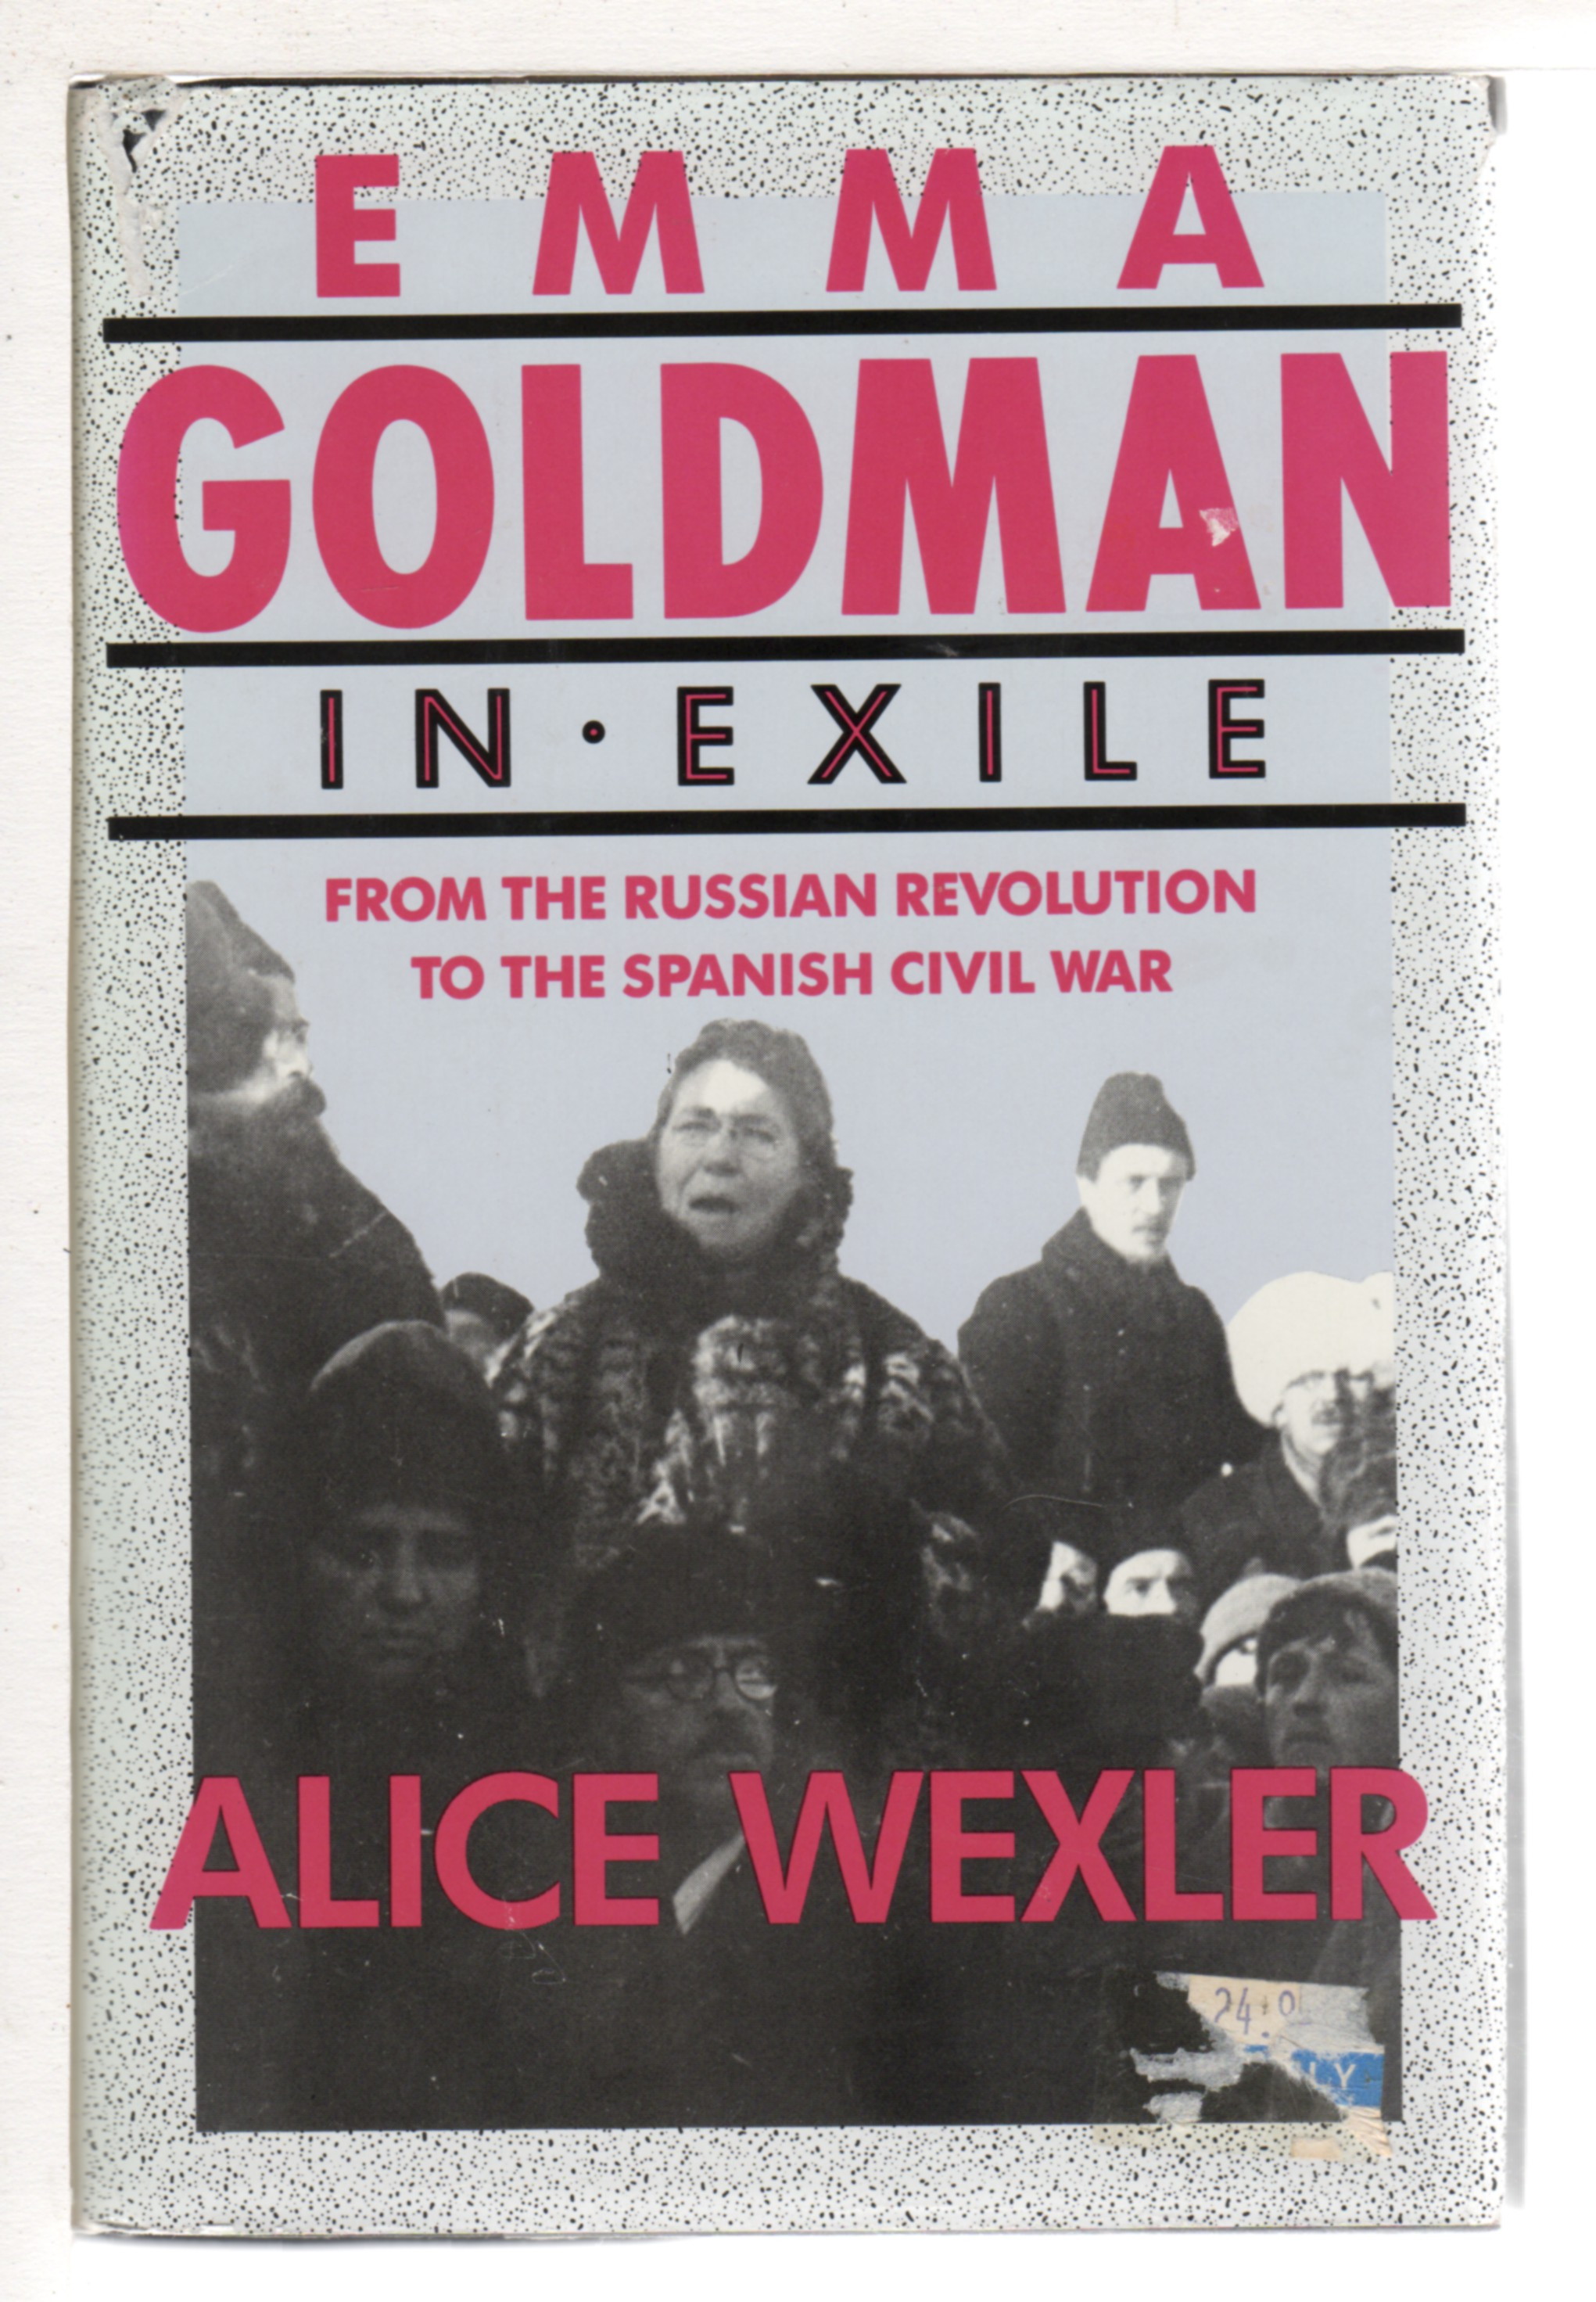 EMMA GOLDMAN IN EXILE; From the Russian Revolution to the Spanish Civil War. - [Goldman, Emma] Wexler, Alice